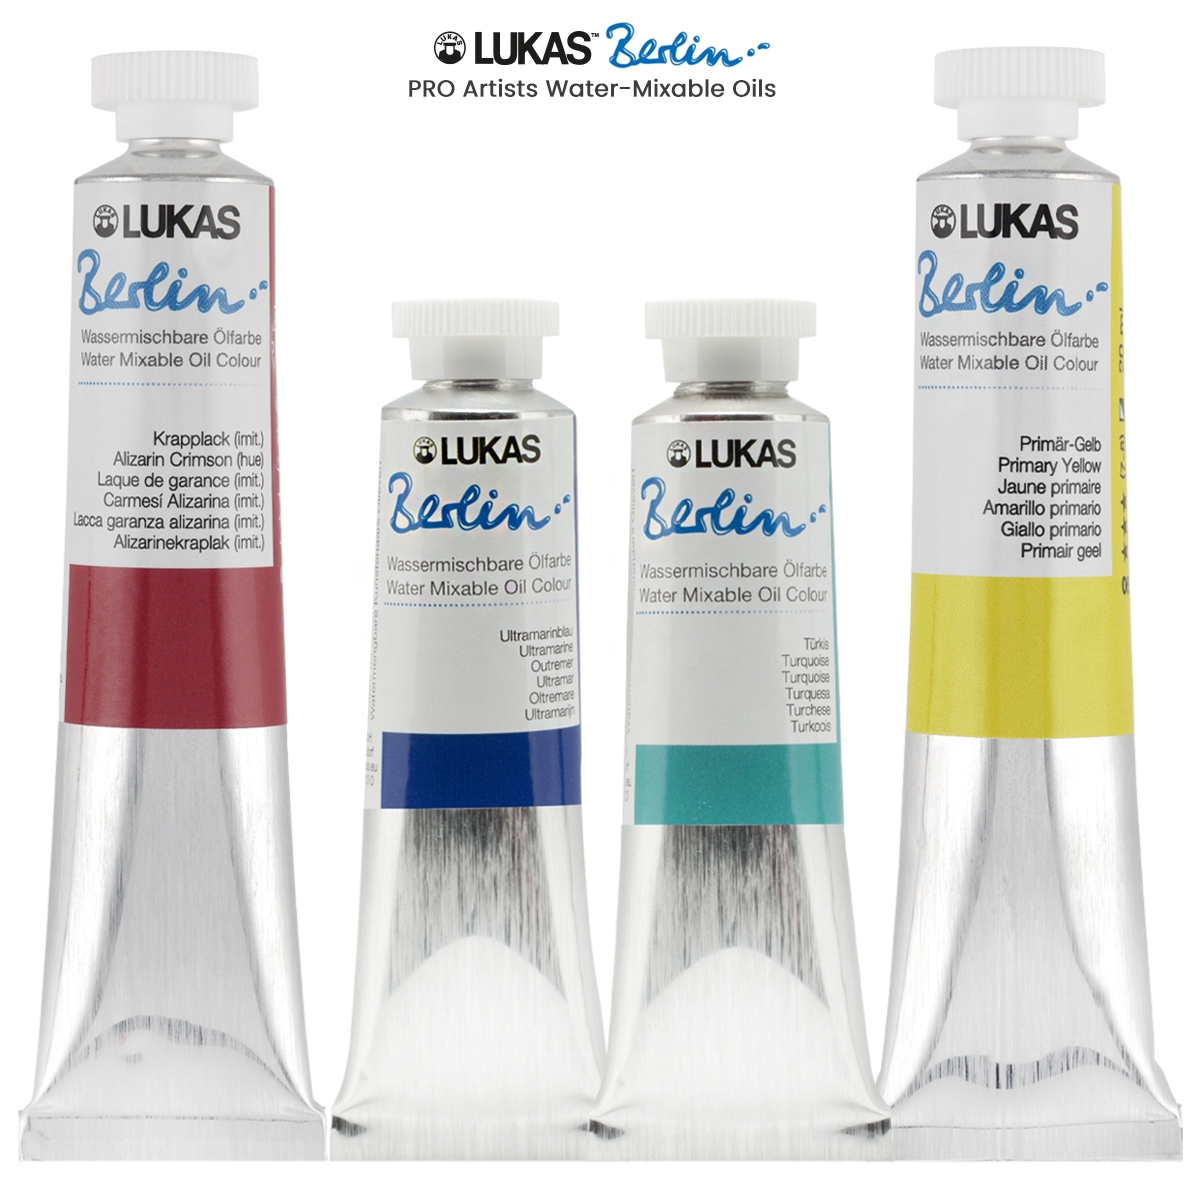 Lukas Berlin Water Mixable Oil Colors